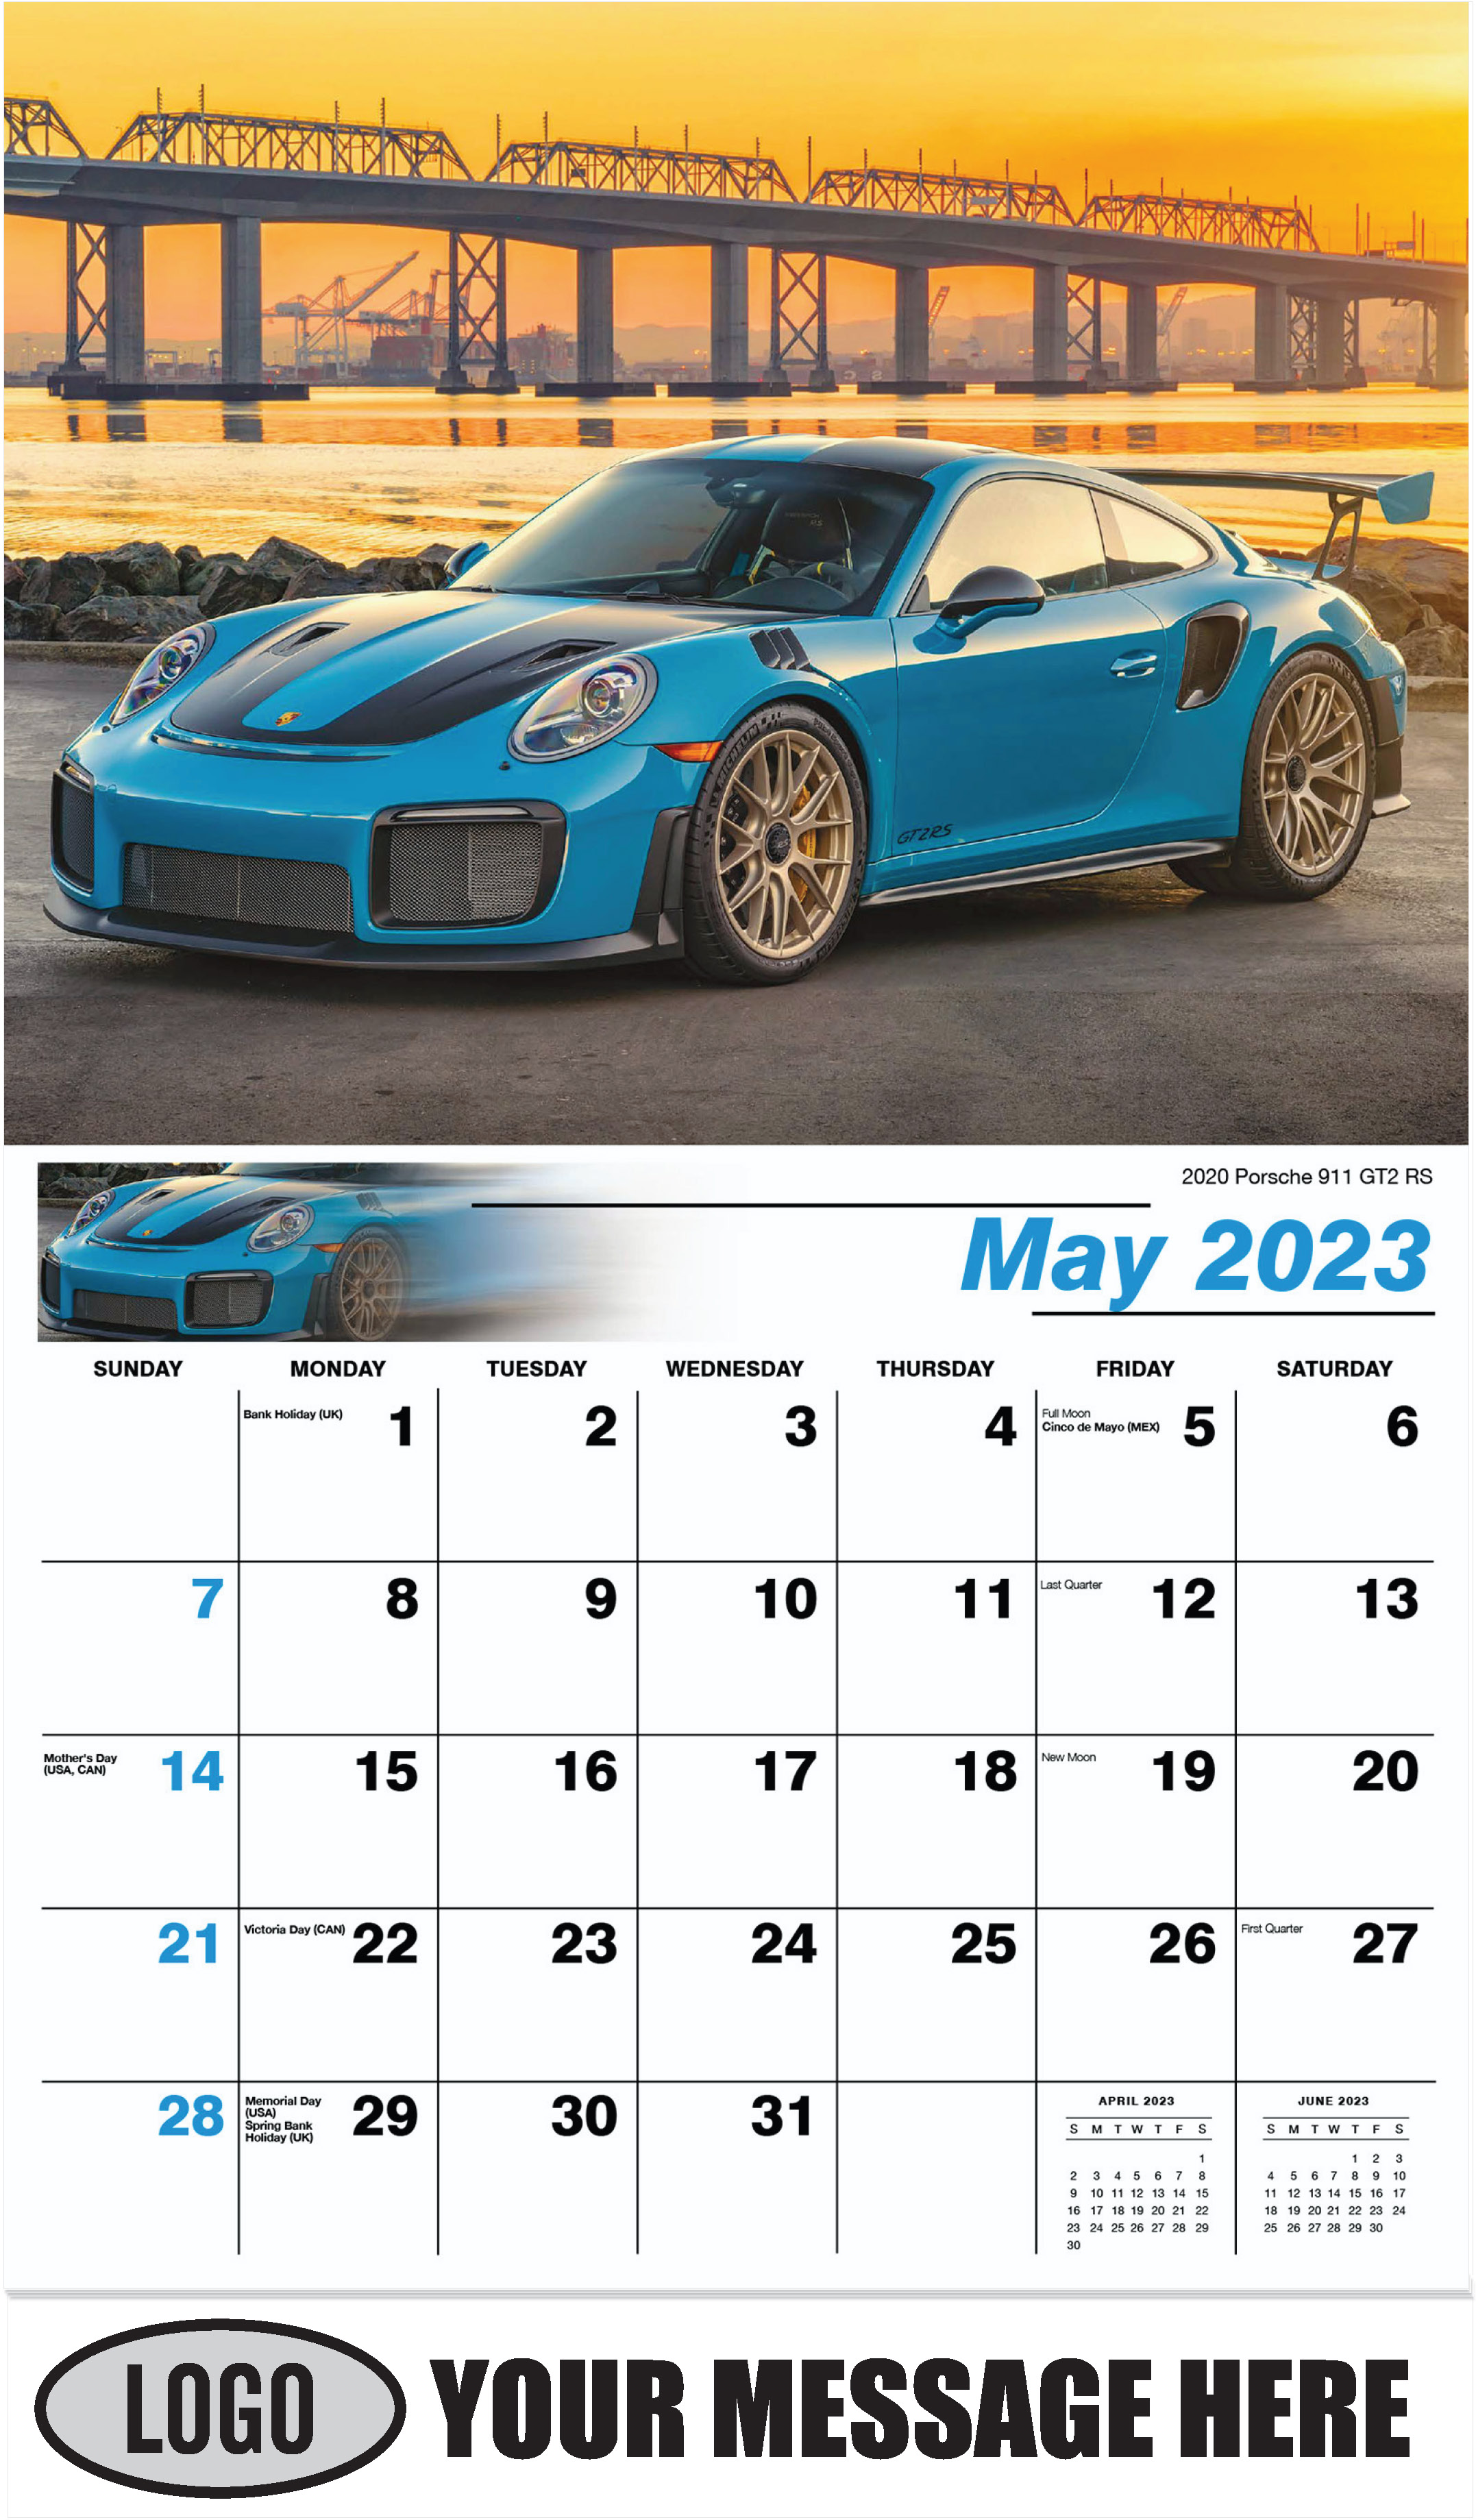 2020 Porsche 911 GT2 RS - May - Exotic Cars 2023 Promotional Calendar